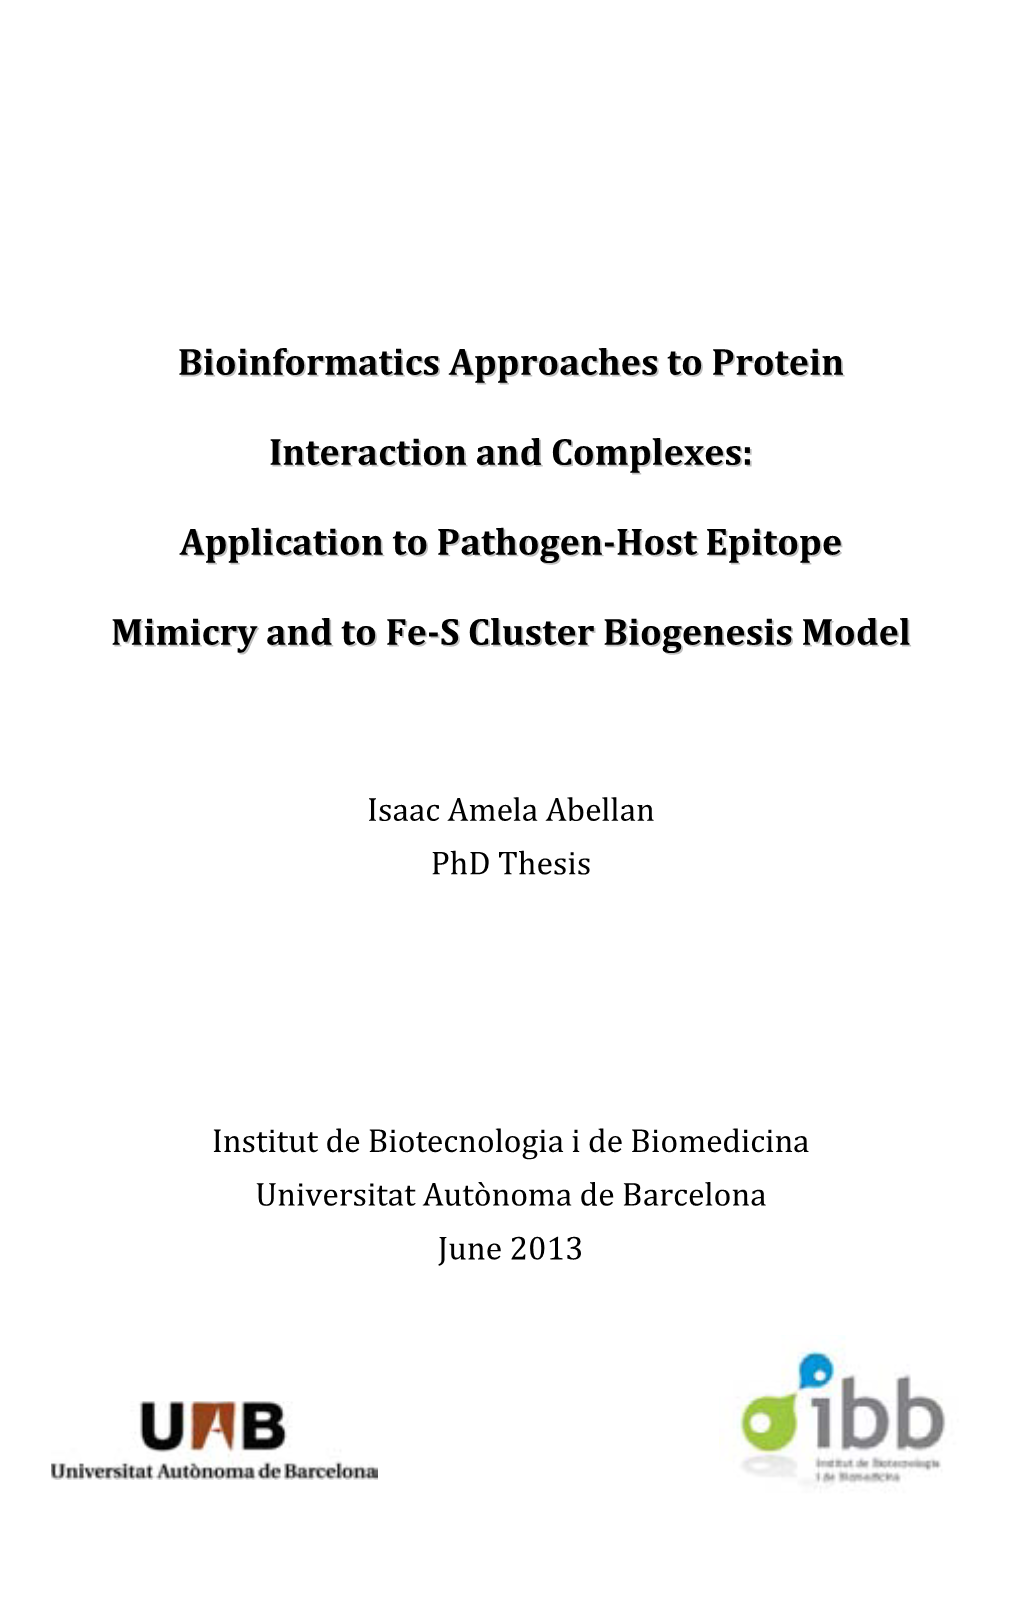 Bioinformatics Approaches to Protein Interaction and Complexes